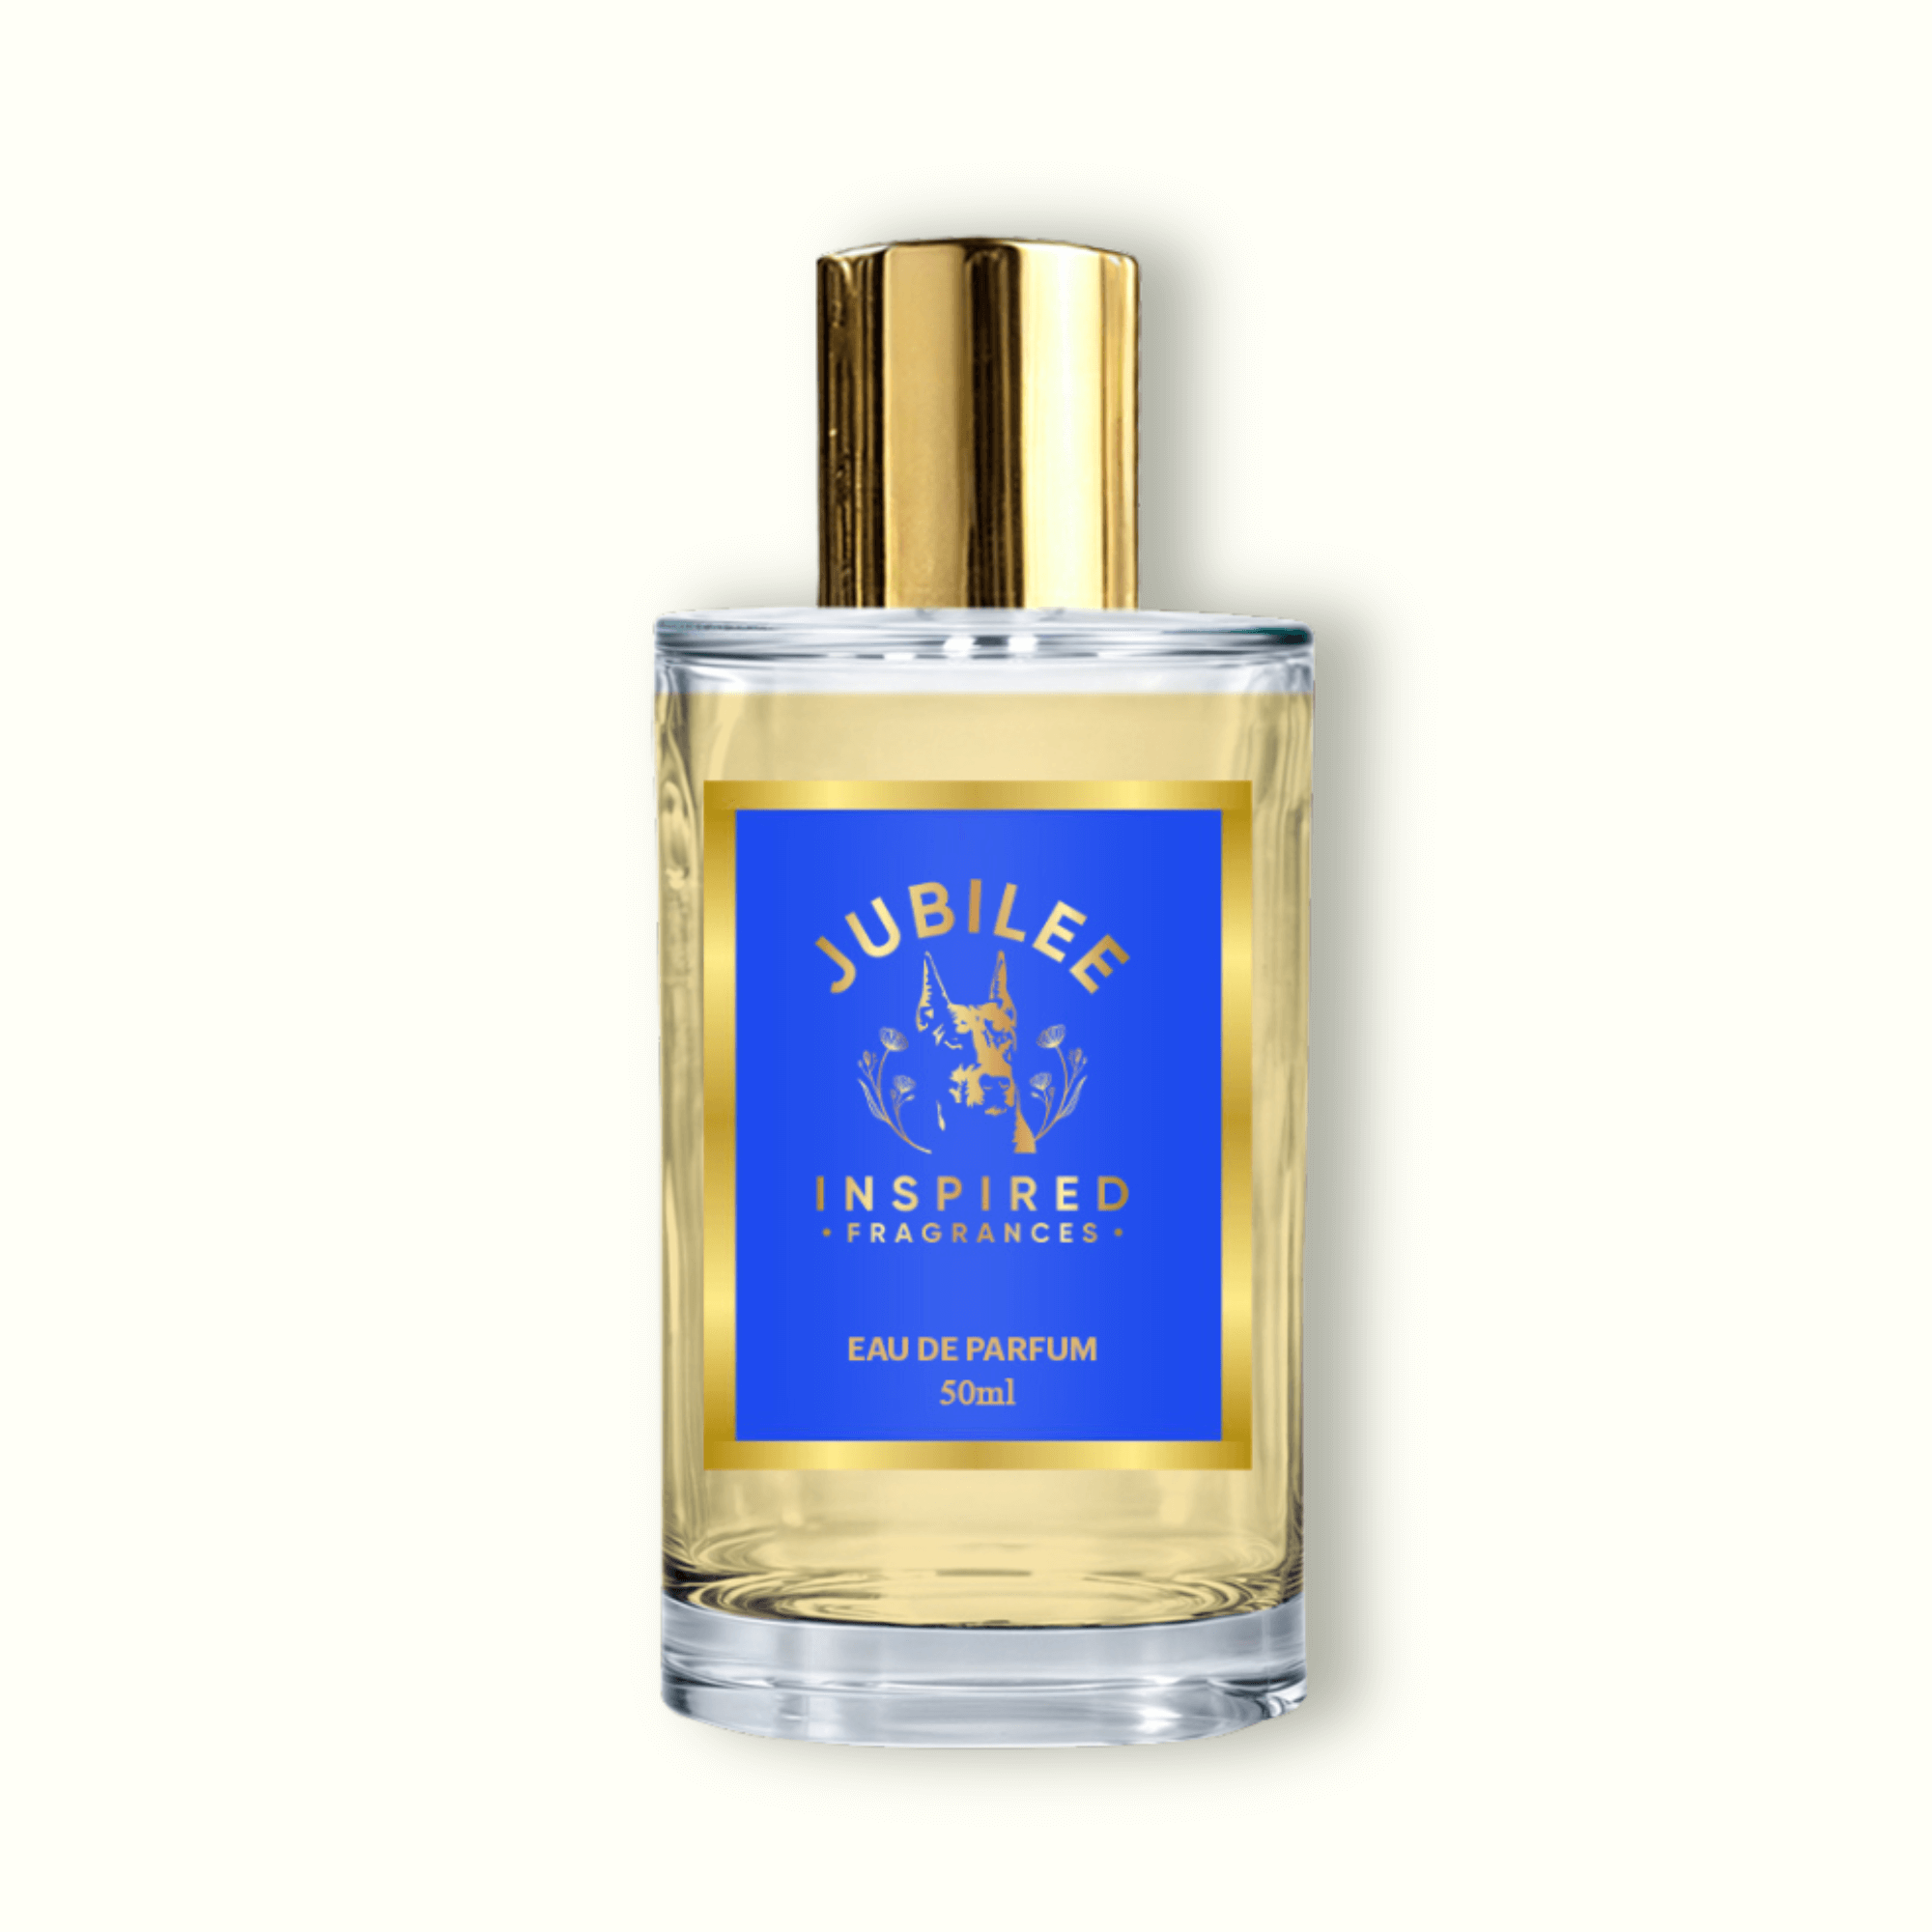 Inspired by The Uncompromising Soh - PE189* dupe perfume , clone perfume , copy perfumean